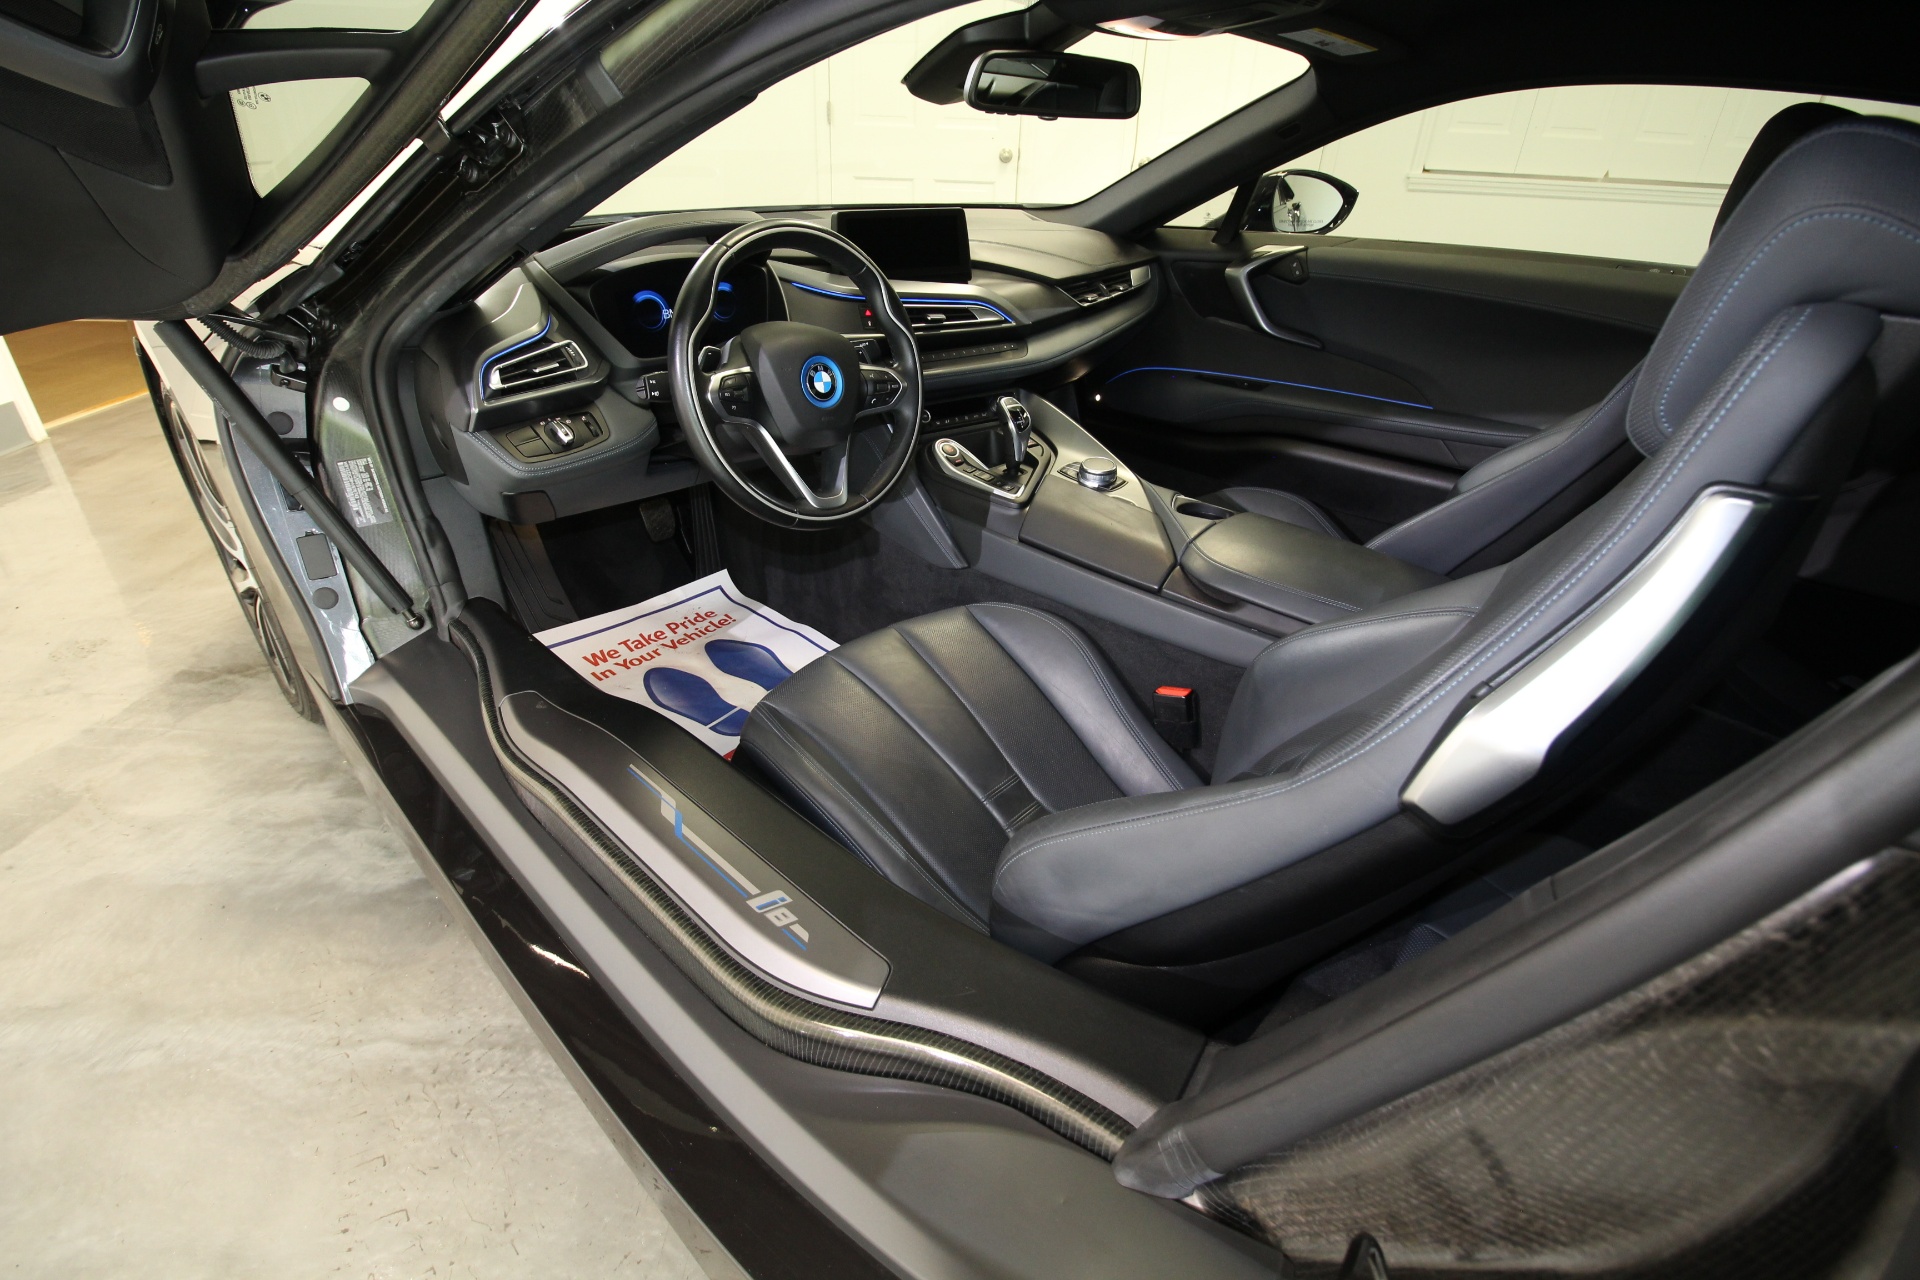 Used 2017 GREY BMW i8 LOW MILES SUPERB INSIDE AND OUT | Albany, NY